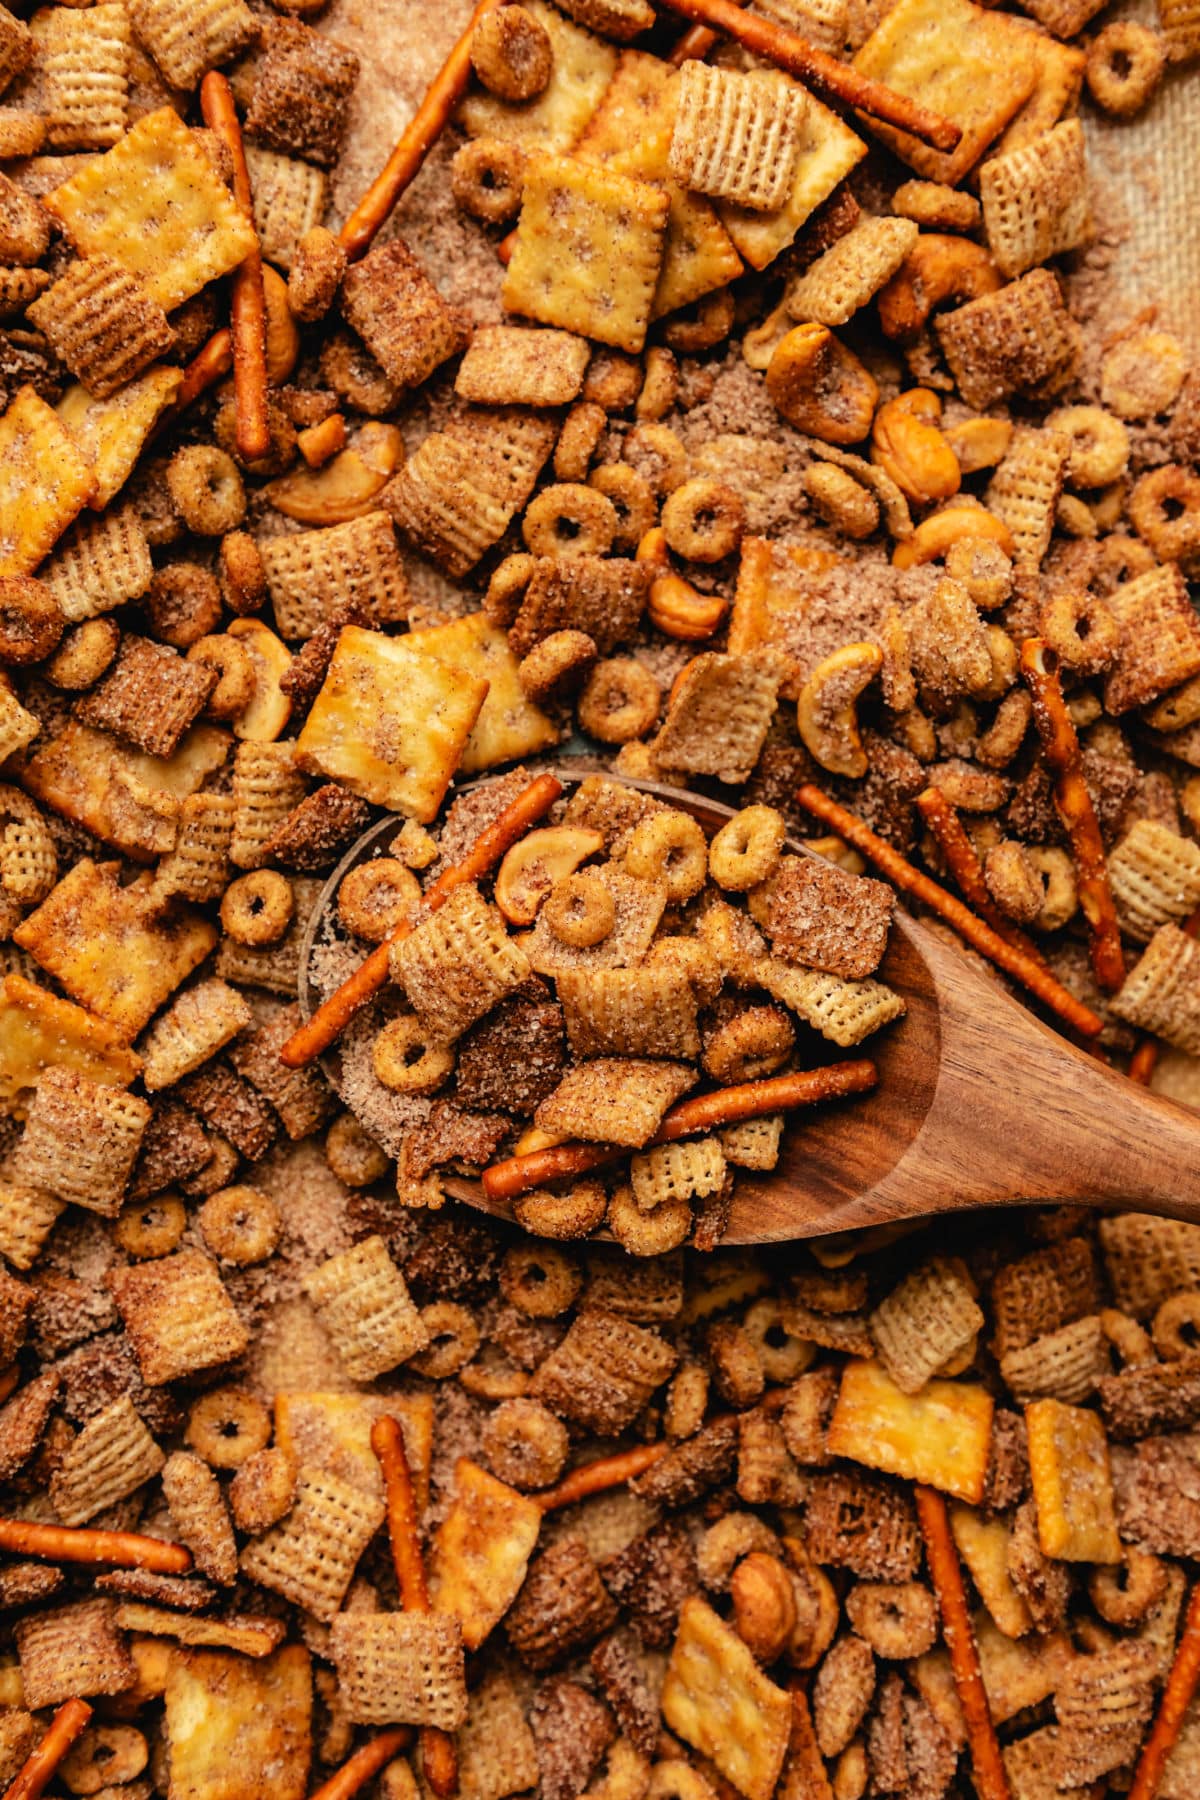 A baking sheet full of cinnamon sweet and salty Chex mix.